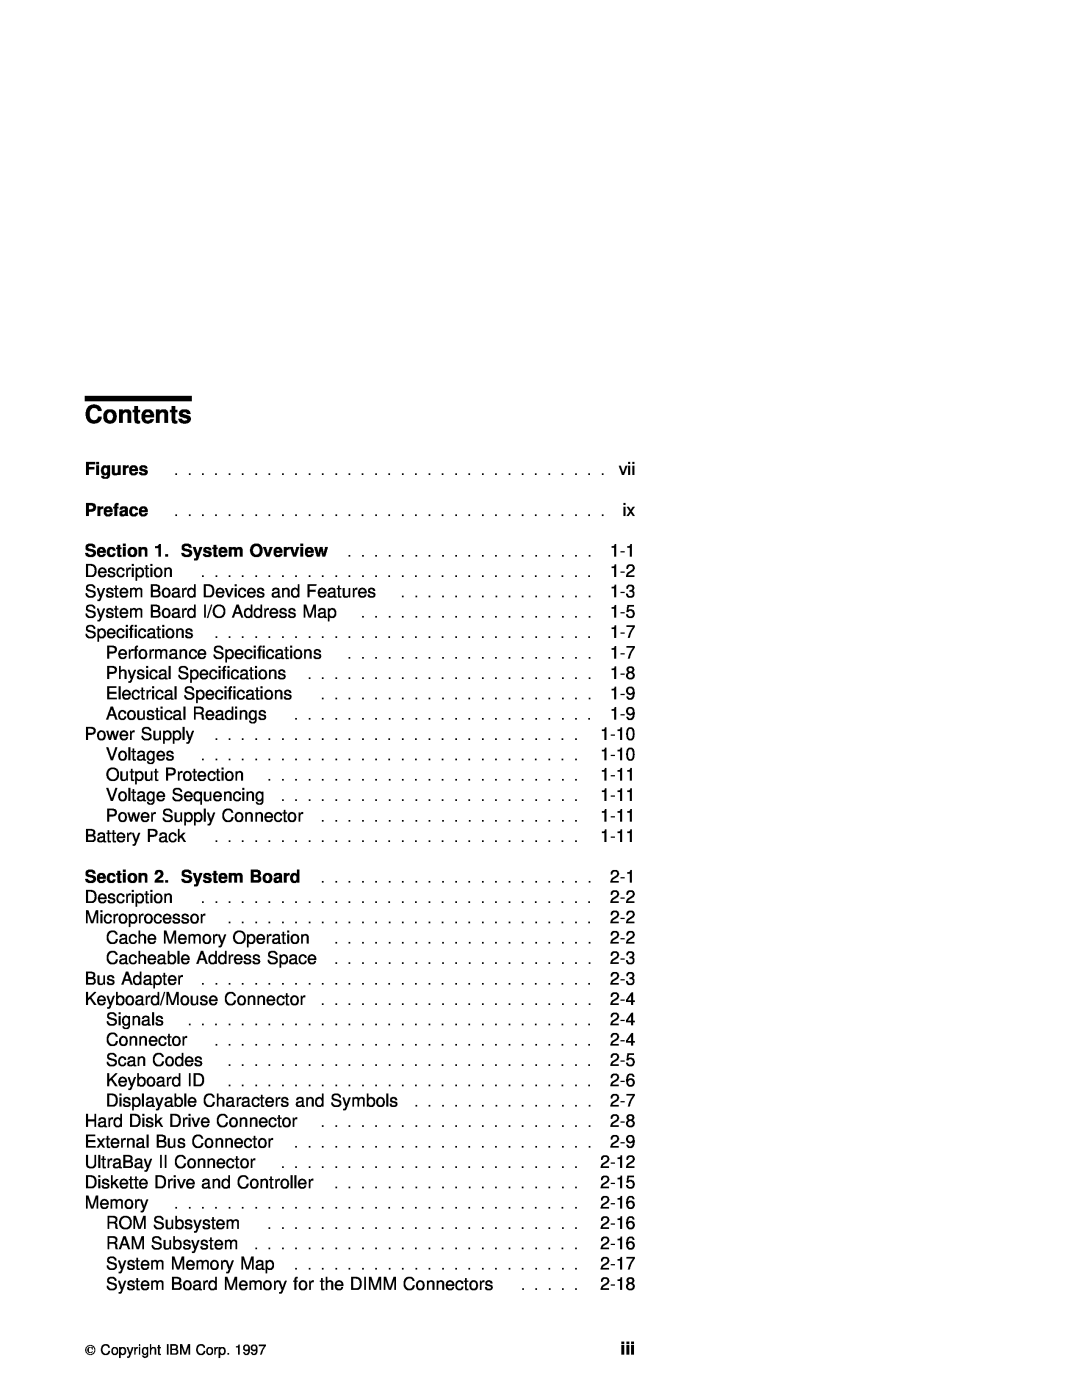 IBM 770 manual Contents, System Overview 